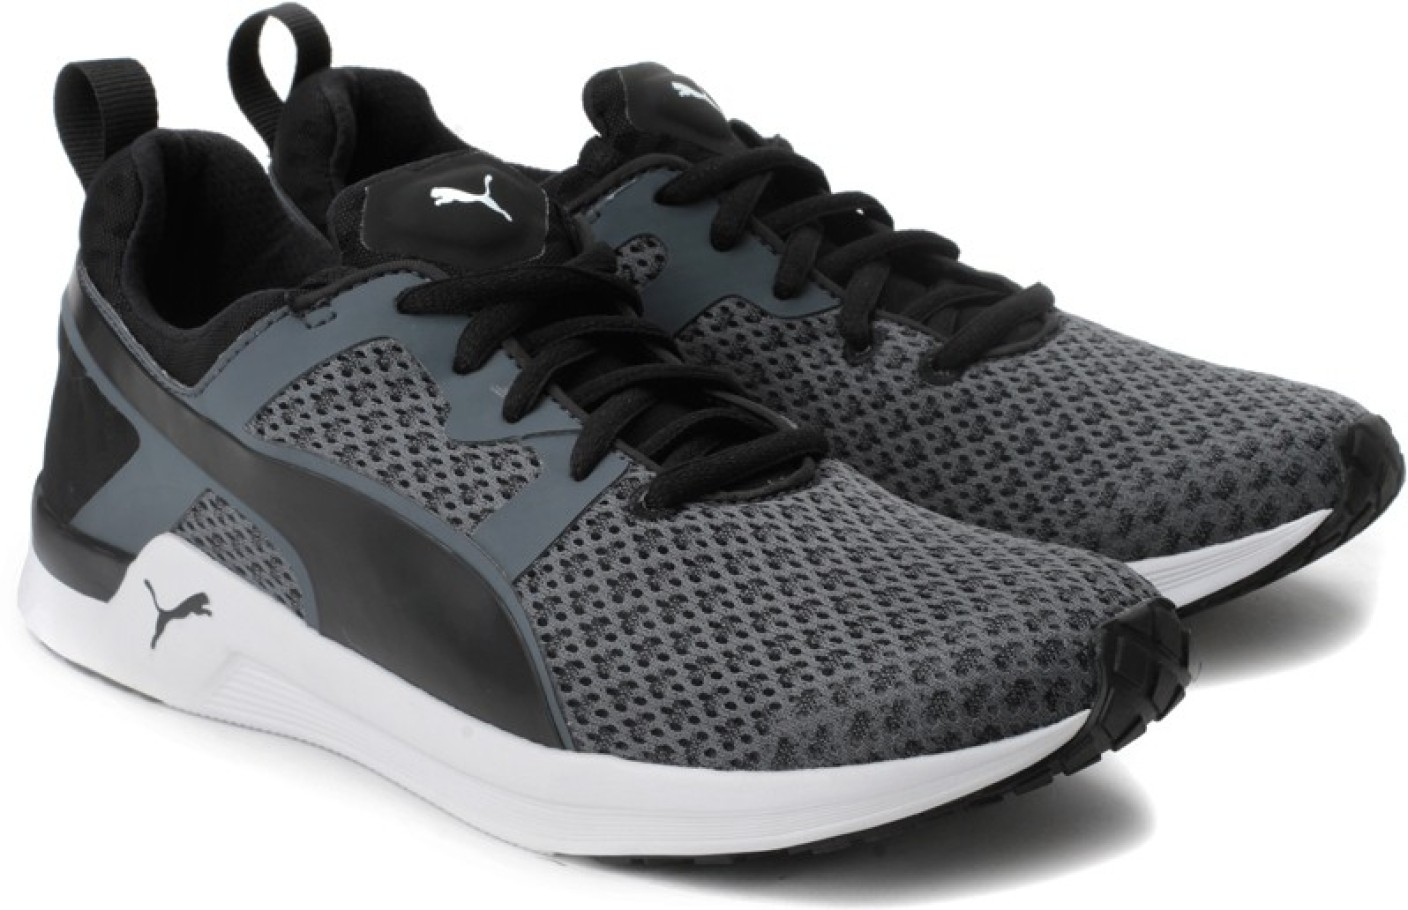 Puma Running Shoes For Women - Buy Black Color Puma Running Shoes For ...